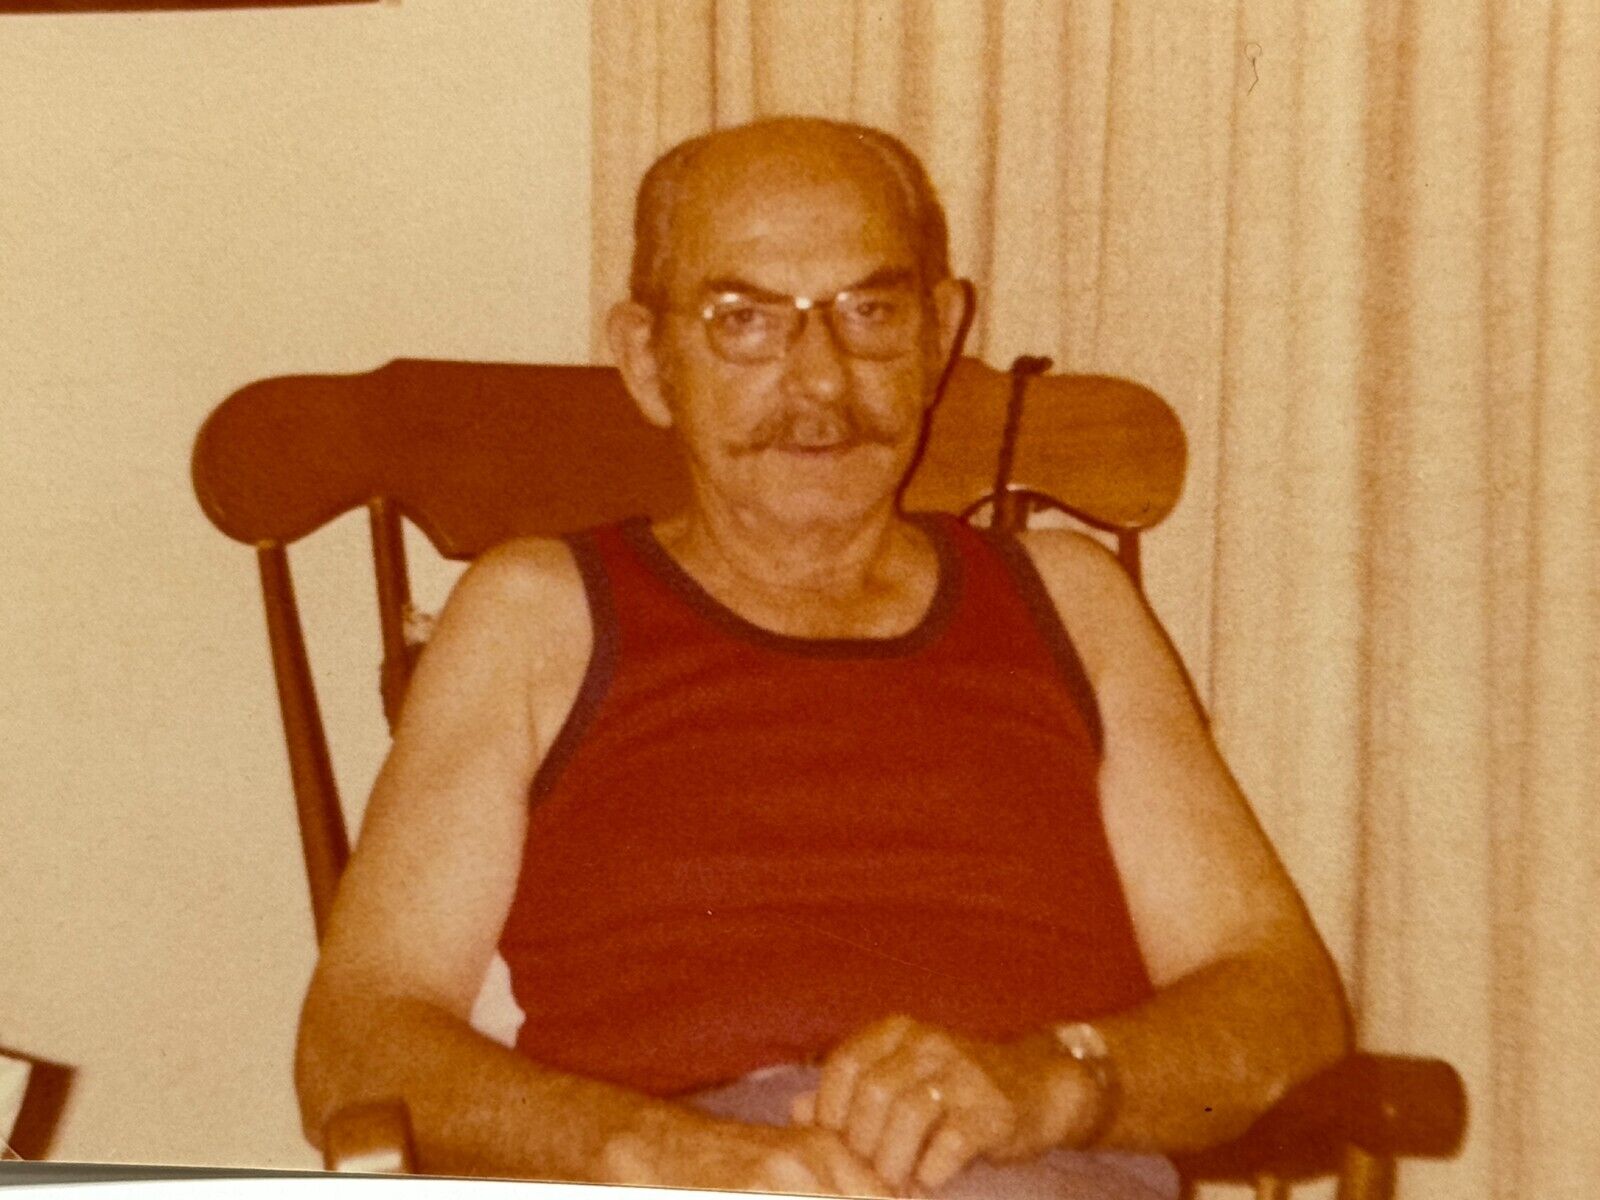 1V Photograph Handsome Old Man Looks At Camera Rocking Chair Mustache 1970's